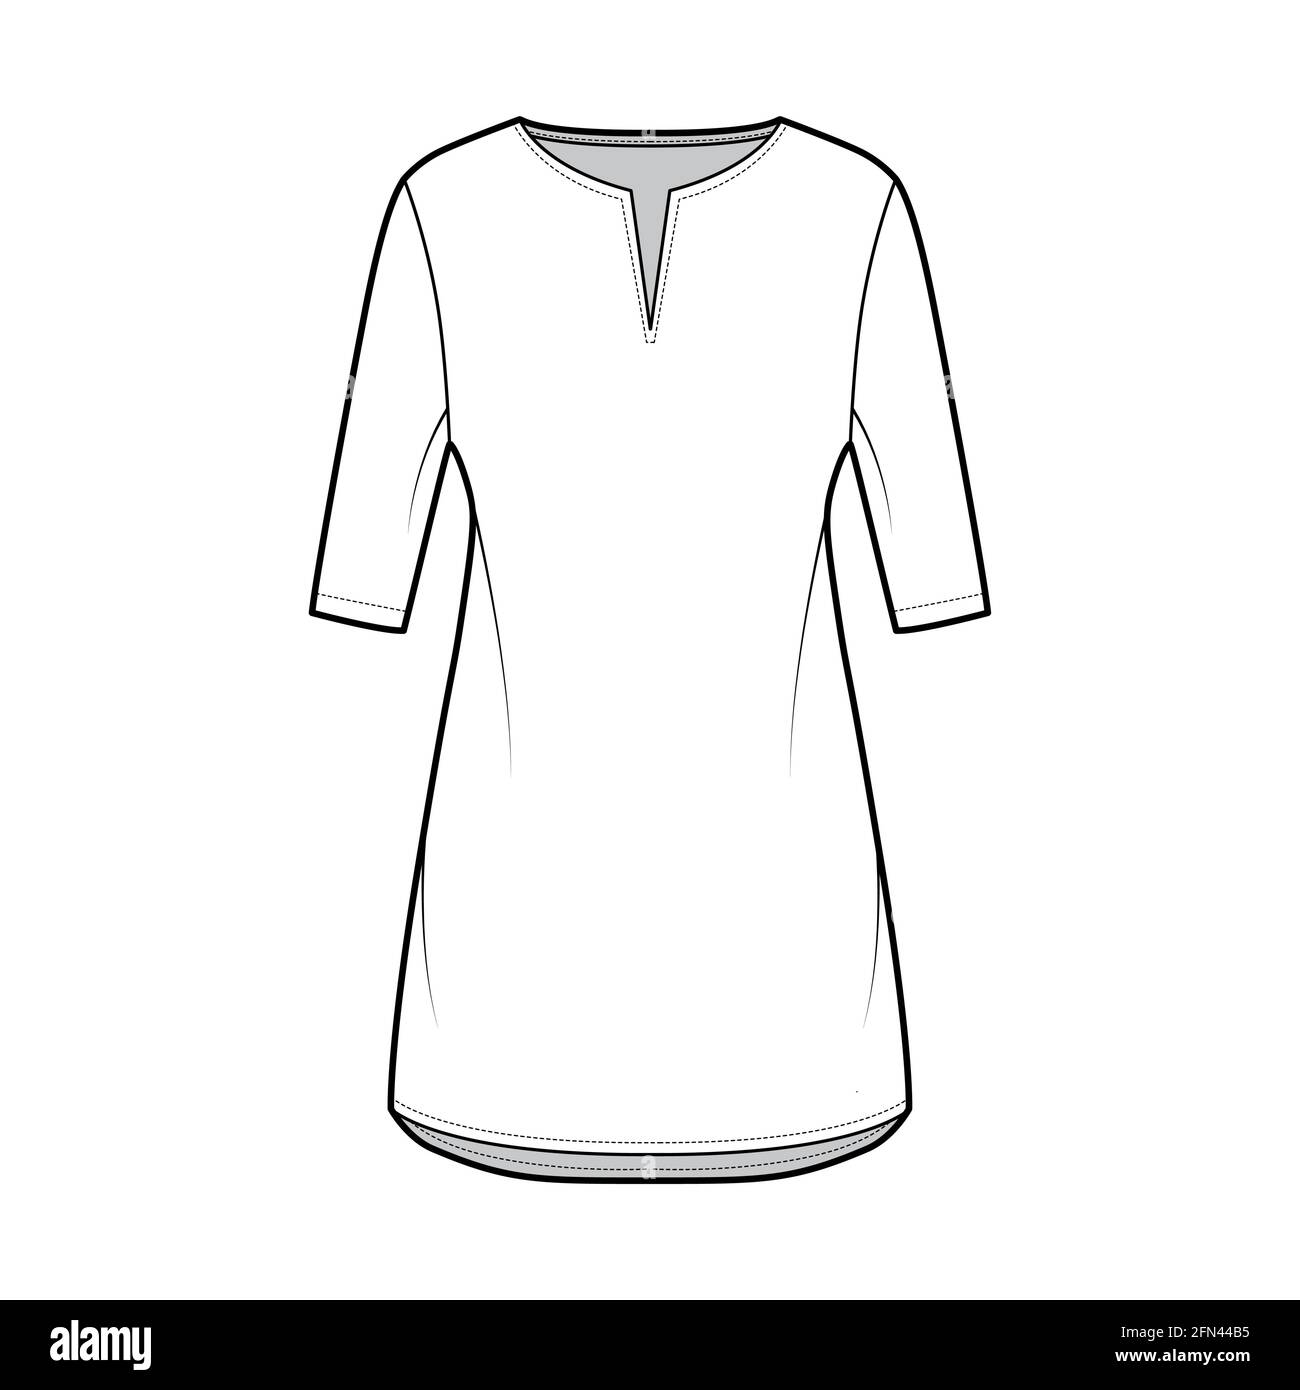 Dress tunic technical fashion illustration with elbow sleeves, oversized body, mini length skirt, slashed neck. Flat apparel front, white color style. Women, men unisex CAD mockup Stock Vector